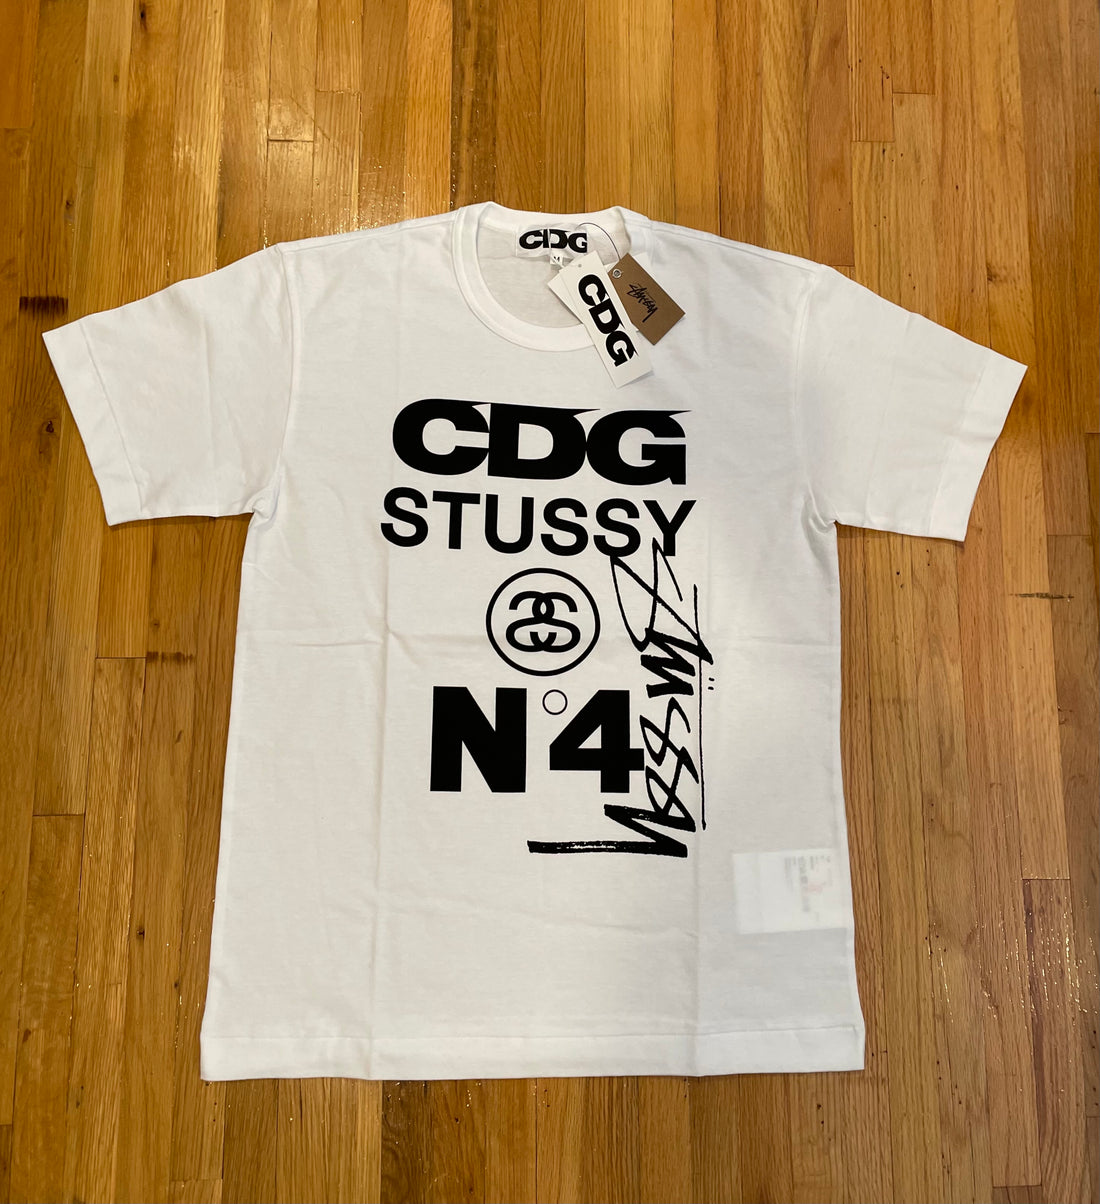 The top 5 most popular Stussy Designs